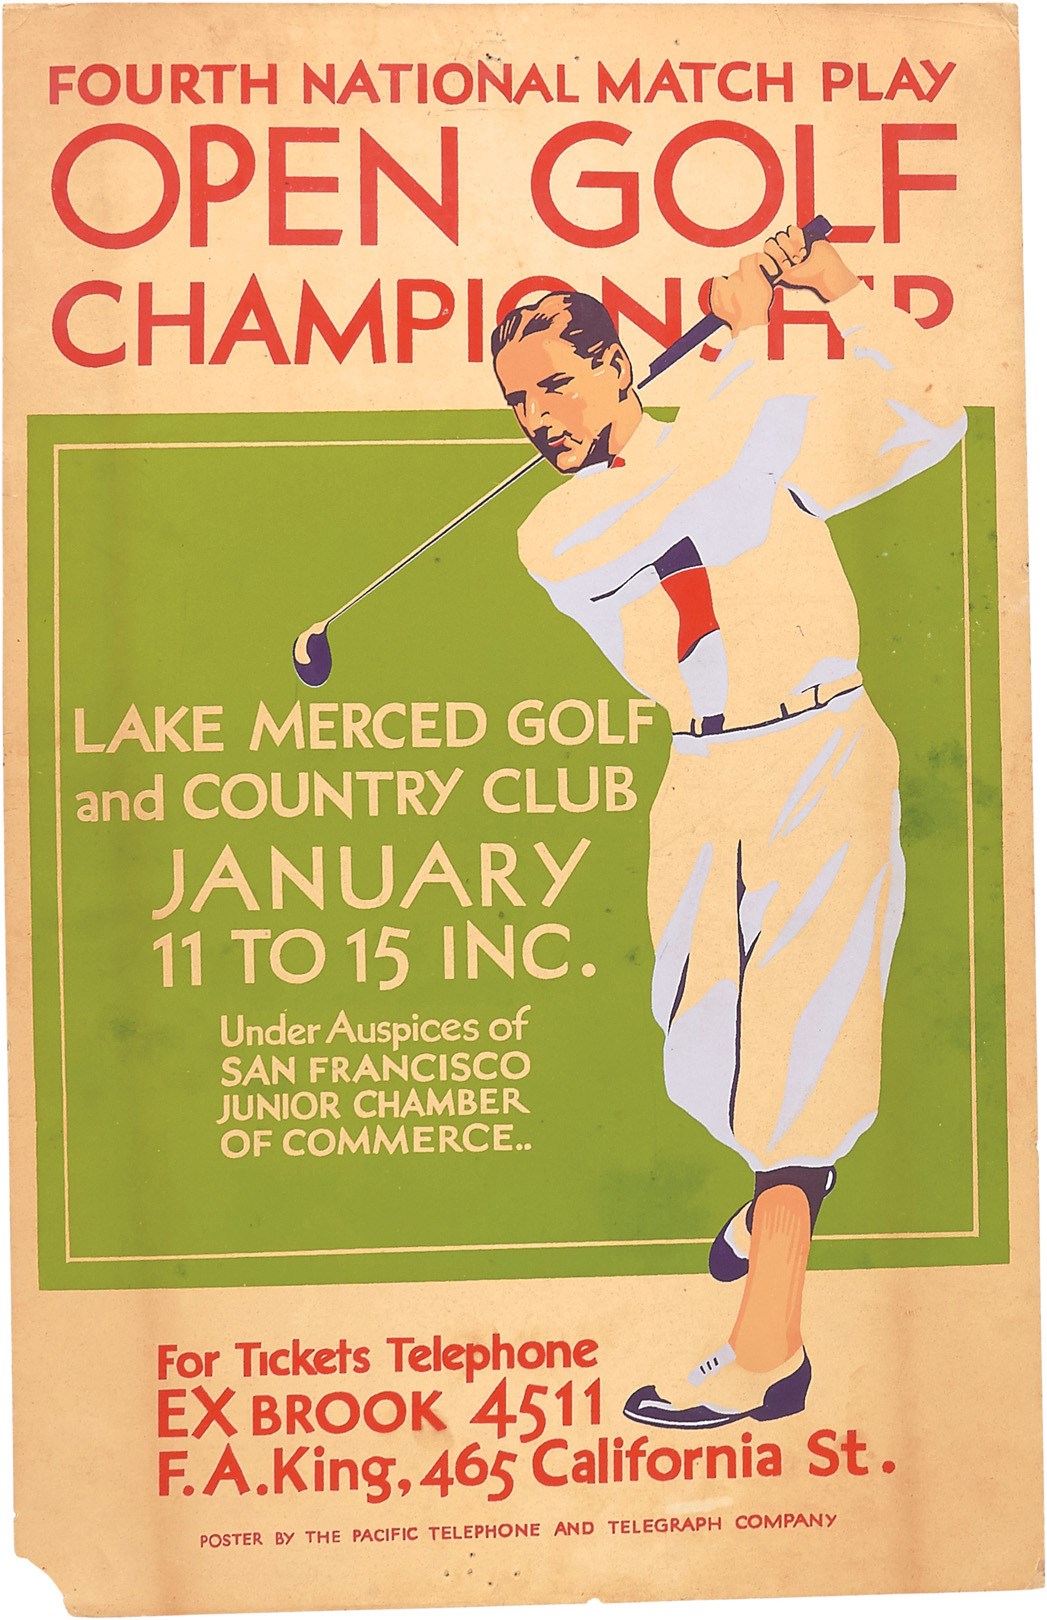 Olympics and All Sports - 1930s "Bobby Jones" Lake Merced Open Golf Championship Poster